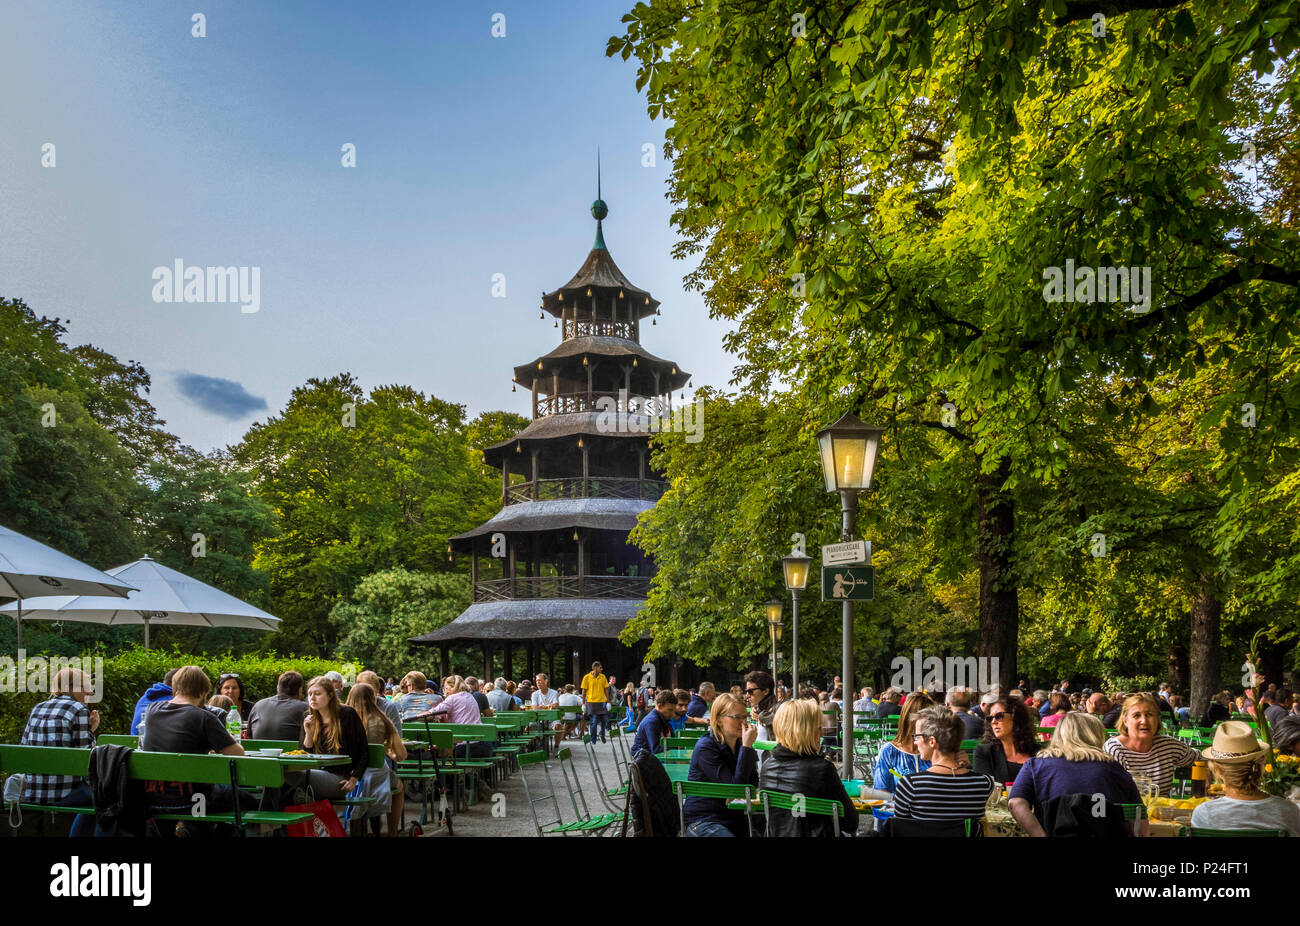 Beer garden at the Chinese Tower in the English Garden, Munich, Upper Bavaria, Bavaria, Germany, Europe Stock Photo